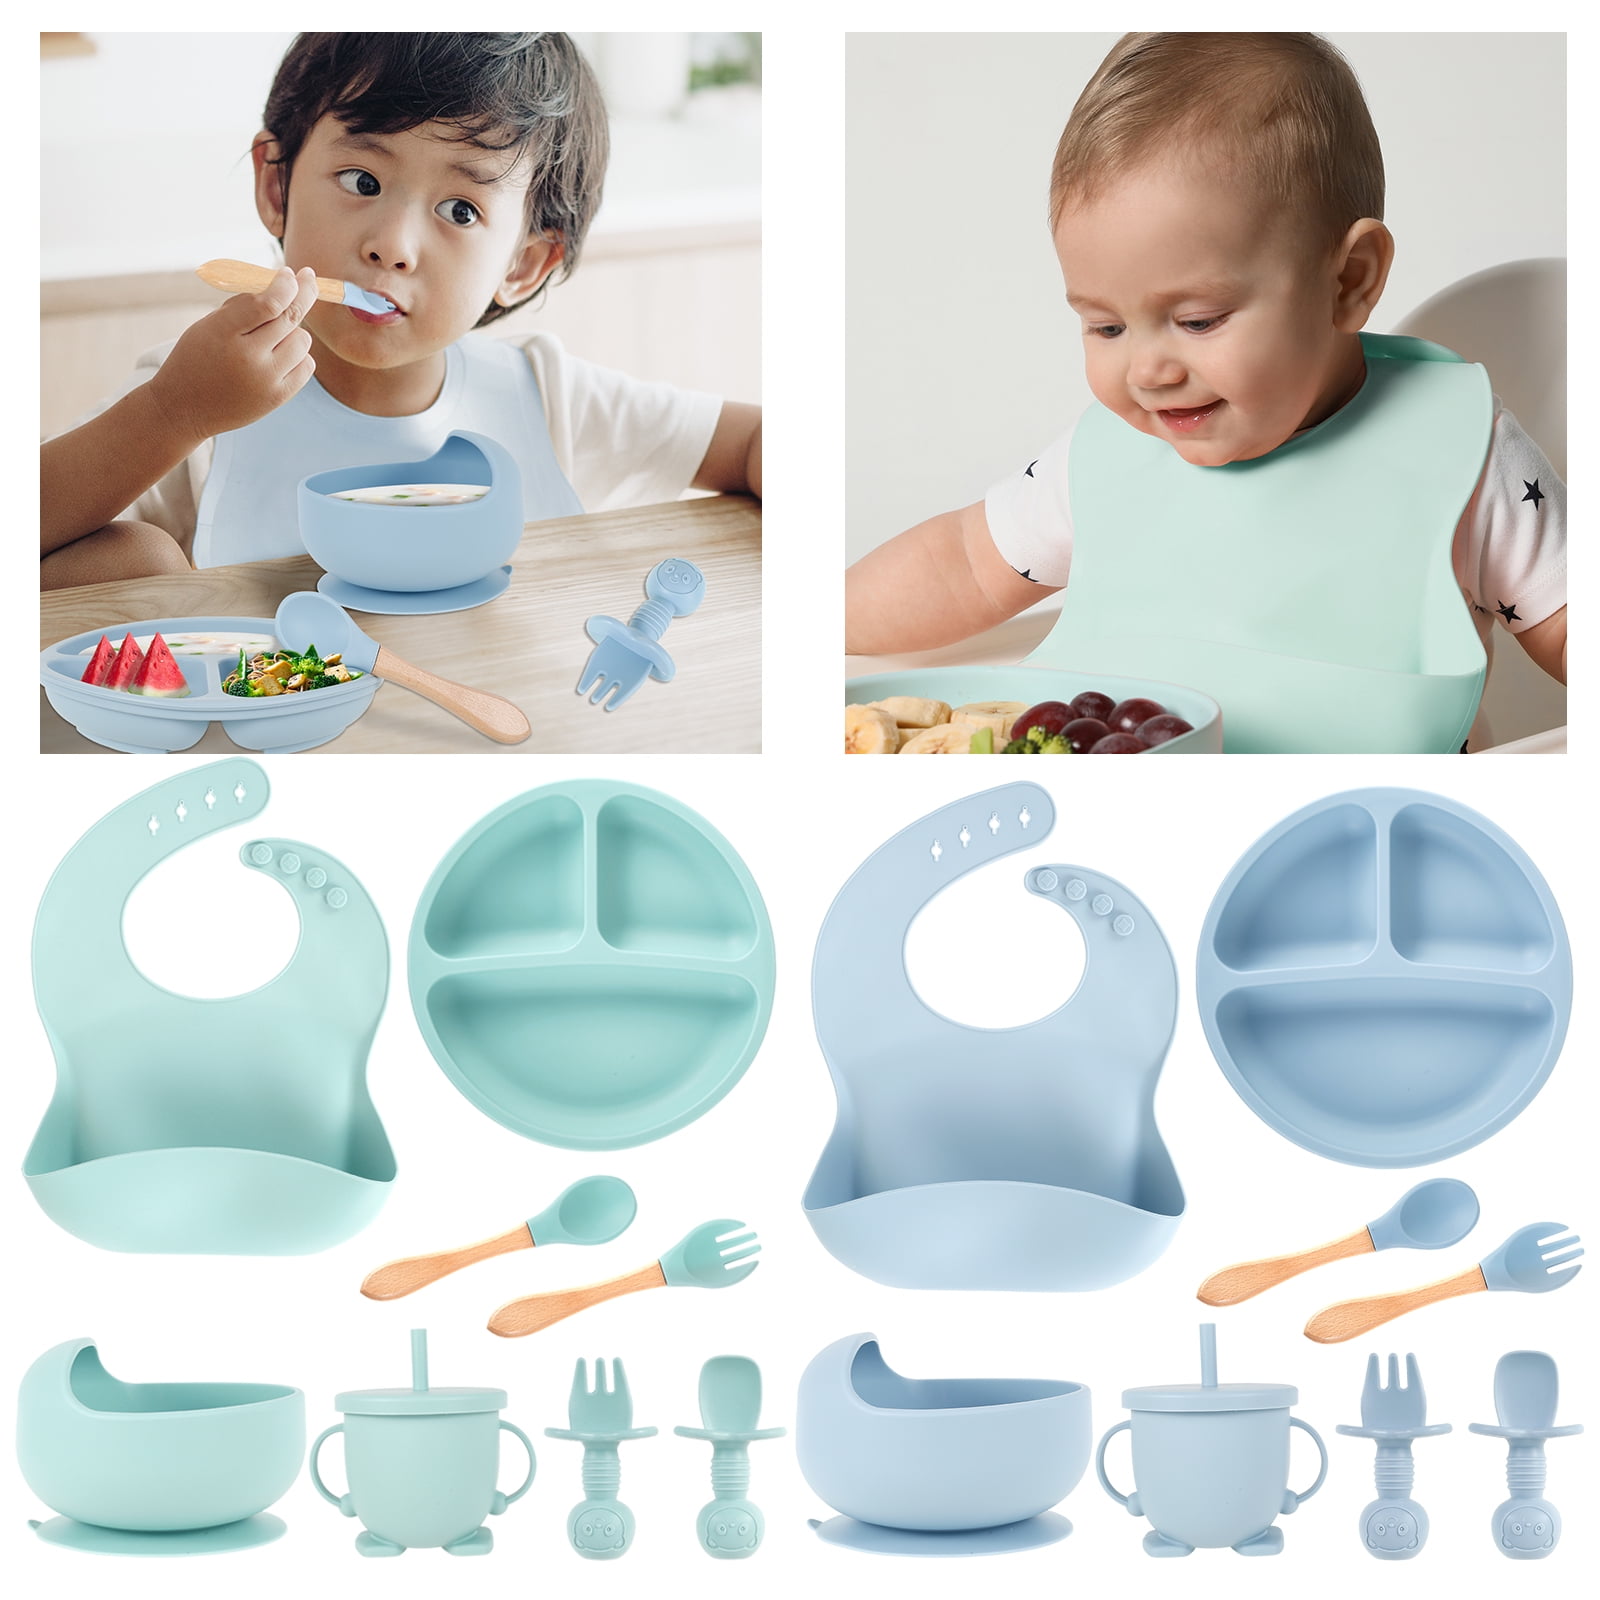 2 Sets Lilow Silicone Baby Feeding Set Including Baby Utensils 6- 12 Months